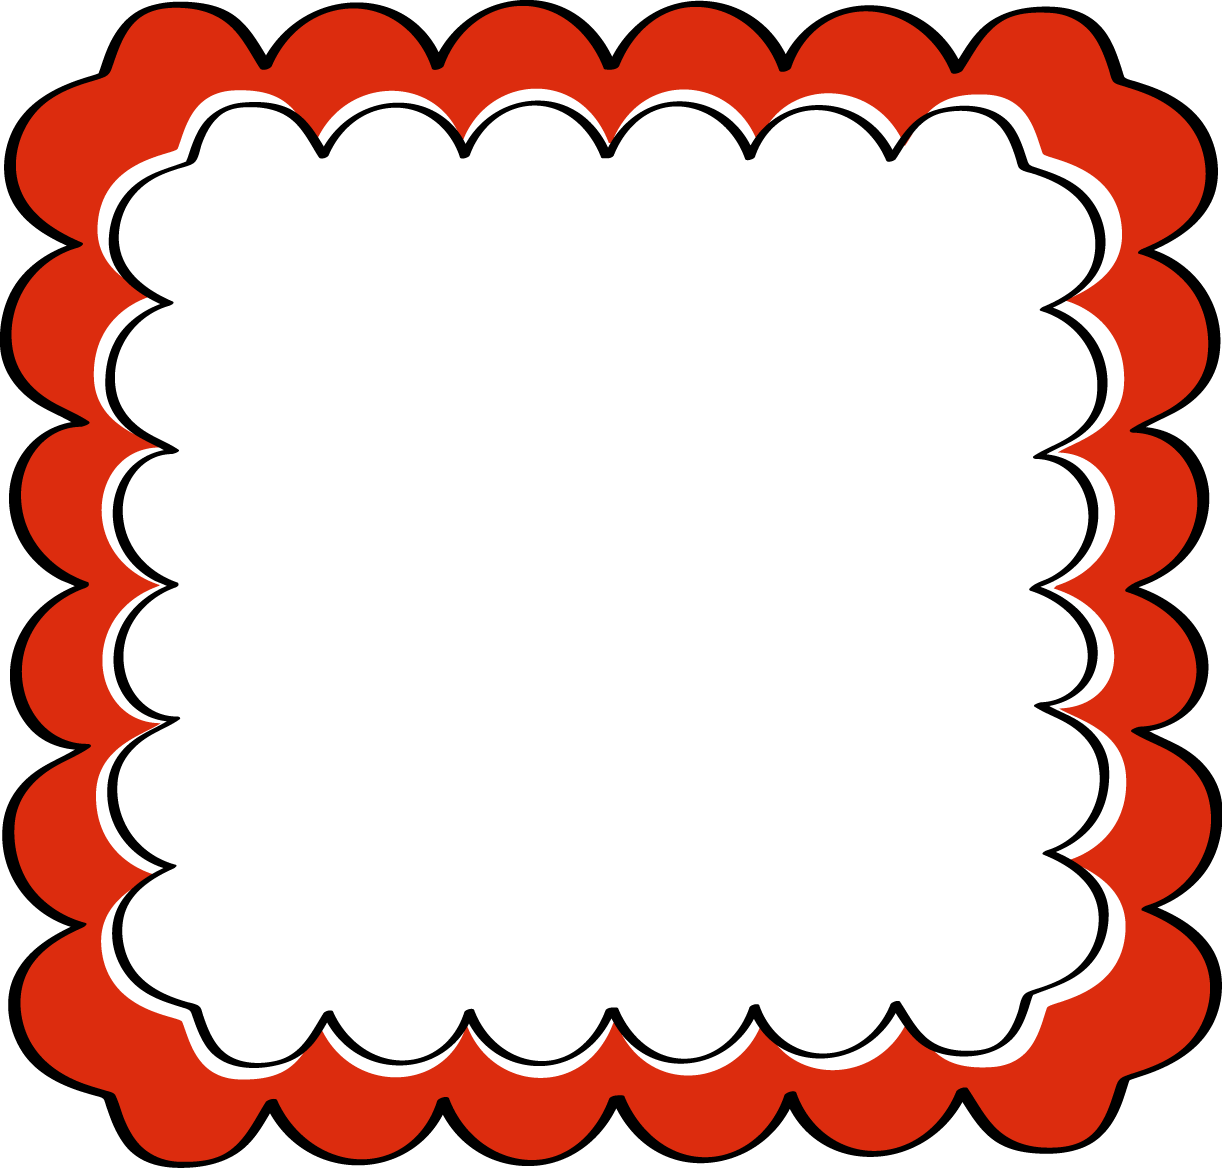 Label clipart scrapbook. Frames and borders red